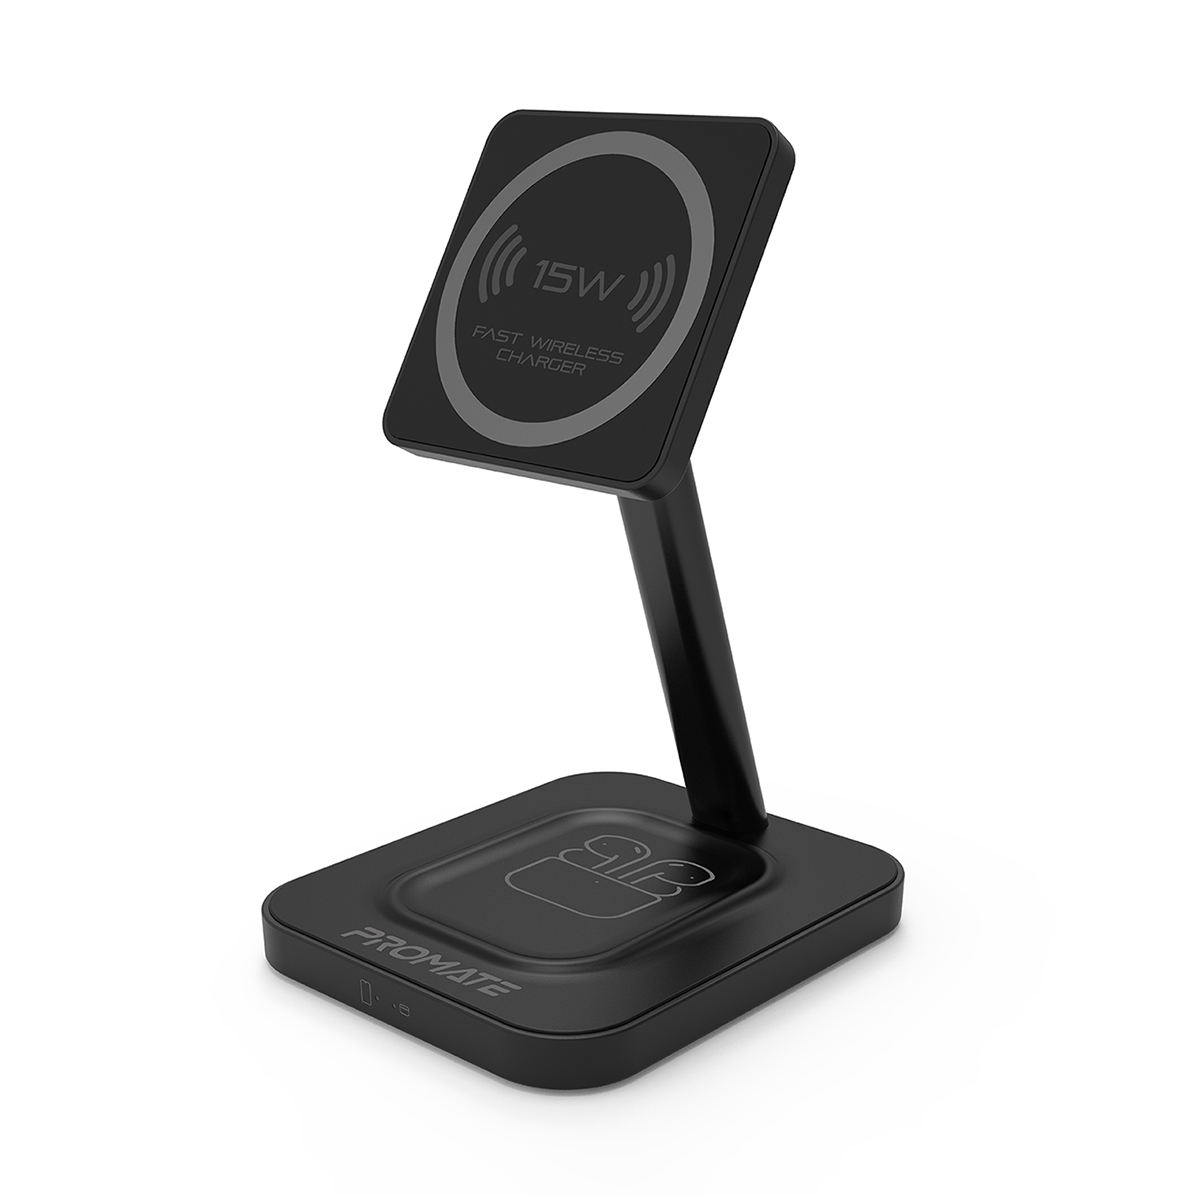 Promate Magnetic Wireless Charger for iPhone 12, 2-in-1 Mag-Safe 15W Fast Wireless Charger with Adjustable Neck and Anti-Slip 5W Charging Pad for iPhone 12/12 Mini/12 Pro/12 Pro Max/AirPods 2/AirPods Pro, AurBase-15W Black